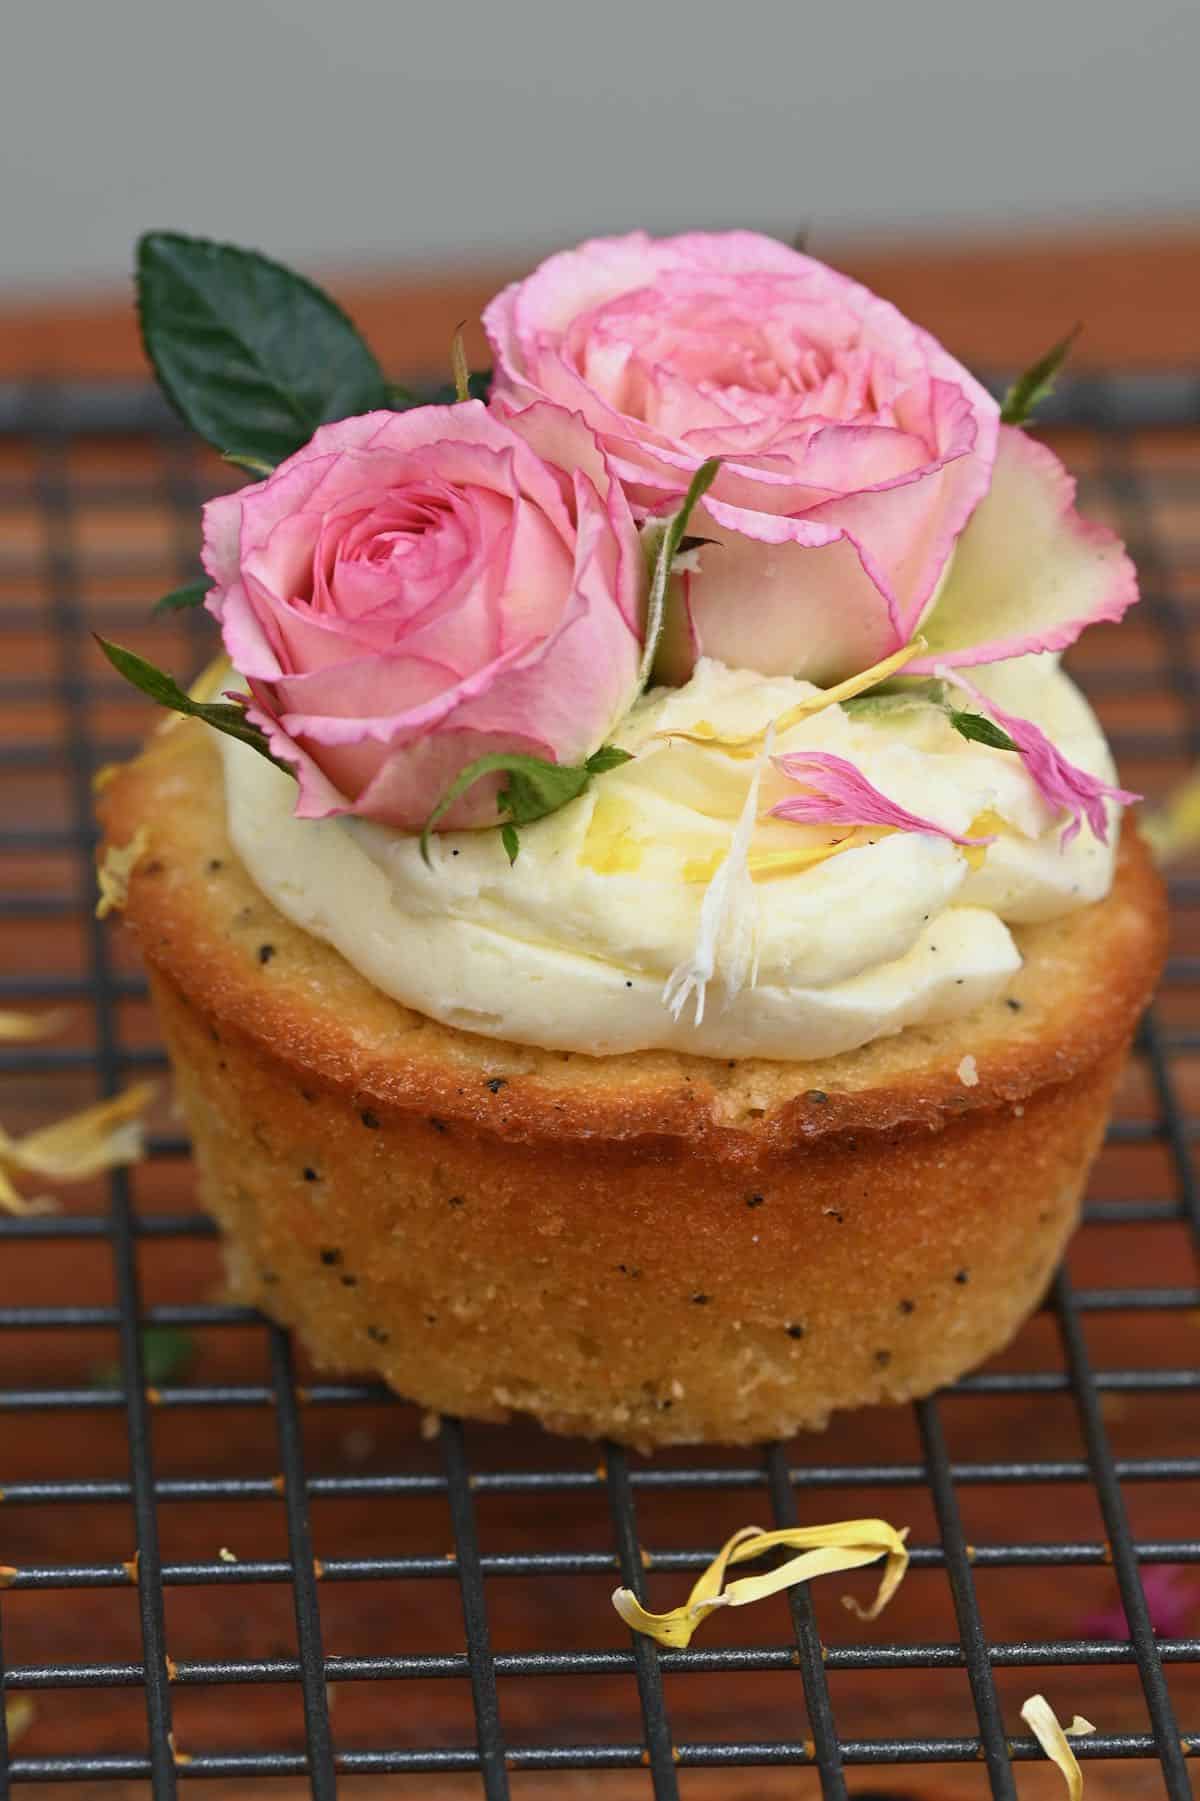 Lemon cupcake decorated with roses